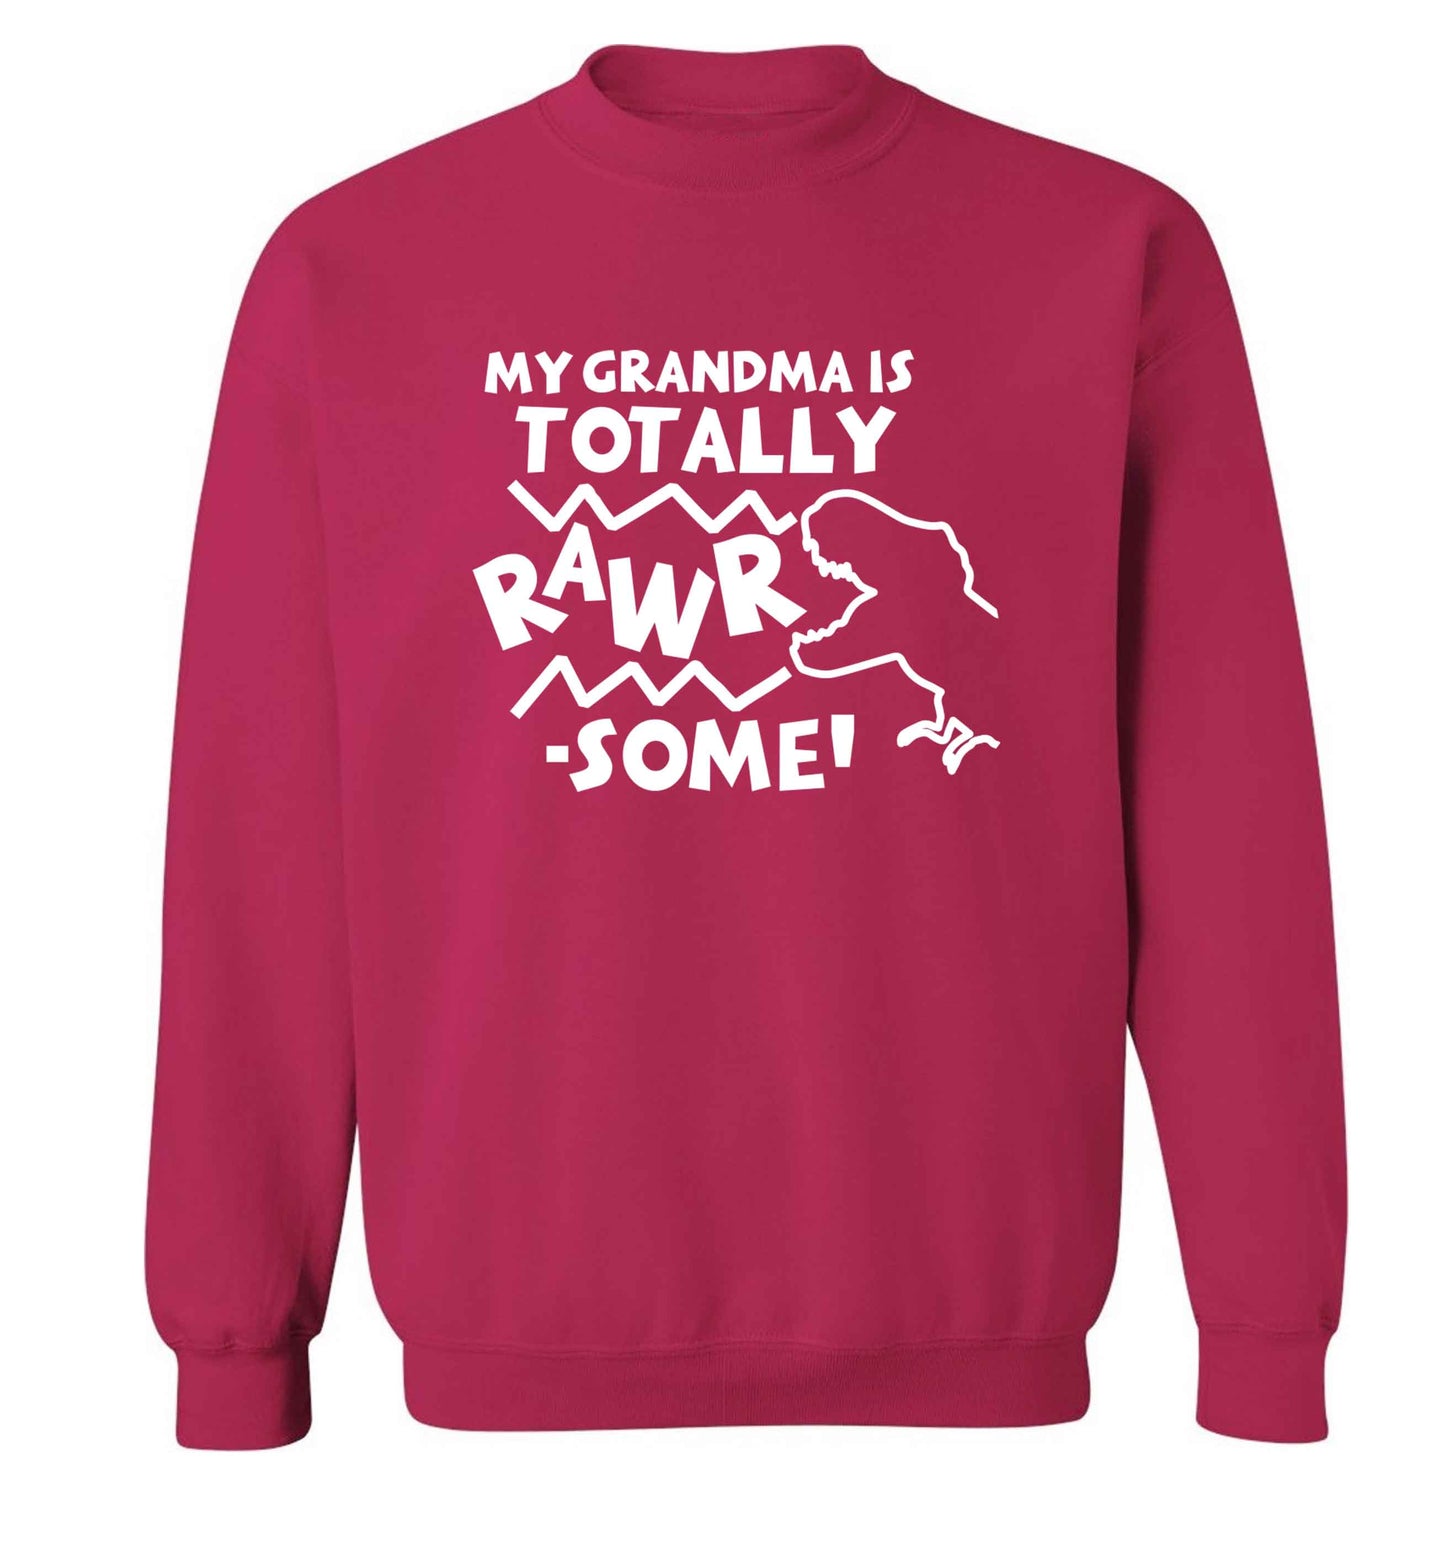 My grandma is totally rawrsome adult's unisex pink sweater 2XL